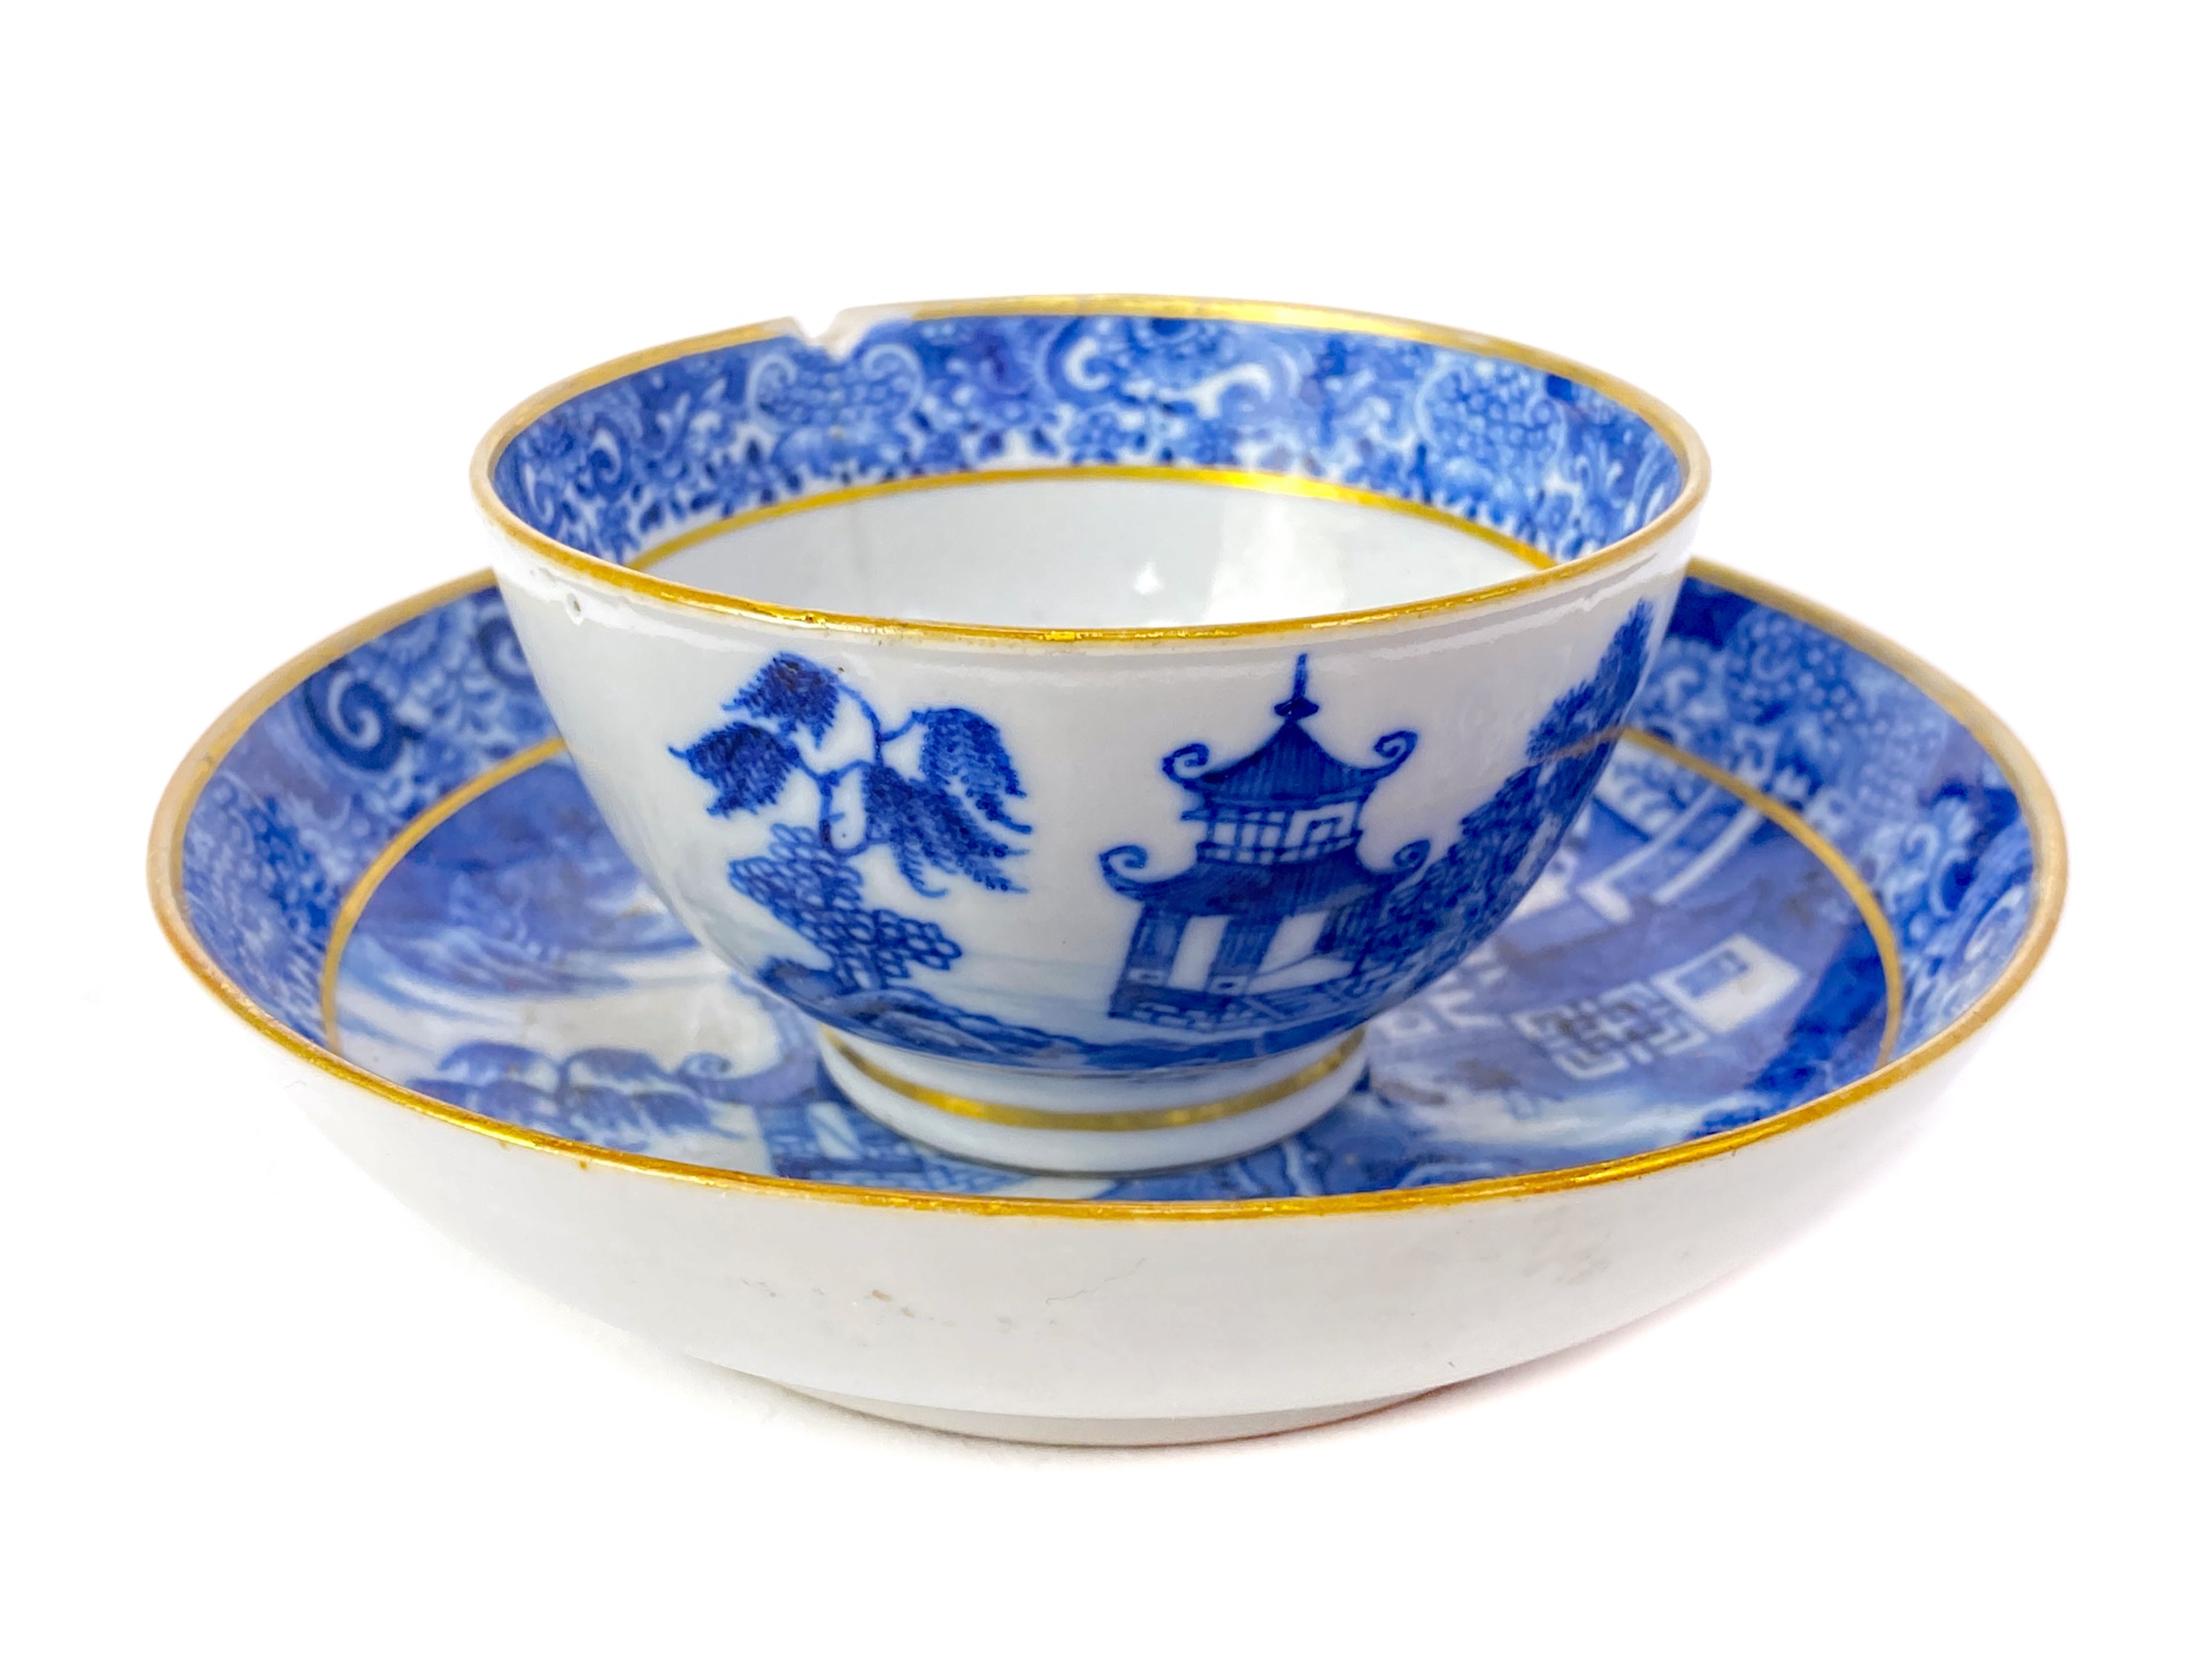 A LATE 18TH CENTURY TEA BOWL AND SAUCER